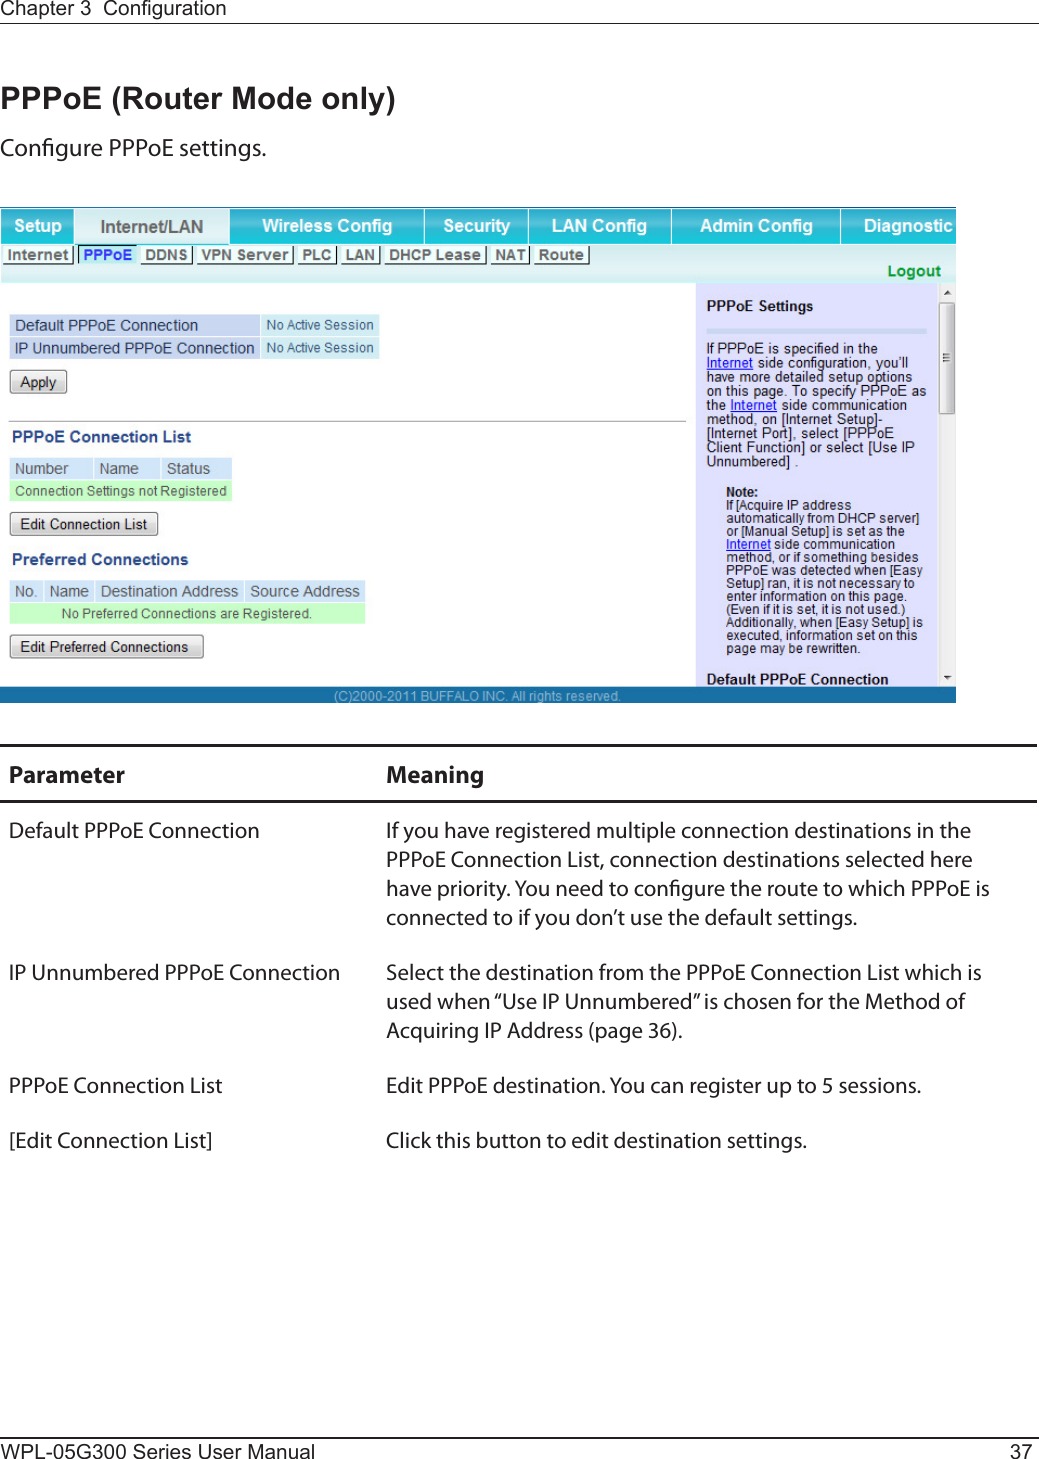 Chapter 3  CongurationWPL-05G300 Series User Manual 37PPPoE (Router Mode only)Congure PPPoE settings.Parameter MeaningDefault PPPoE Connection If you have registered multiple connection destinations in the PPPoE Connection List, connection destinations selected here have priority. You need to congure the route to which PPPoE is connected to if you don’t use the default settings.IP Unnumbered PPPoE Connection Select the destination from the PPPoE Connection List which is used when “Use IP Unnumbered” is chosen for the Method of Acquiring IP Address (page 36).PPPoE Connection List Edit PPPoE destination. You can register up to 5 sessions.[Edit Connection List] Click this button to edit destination settings.